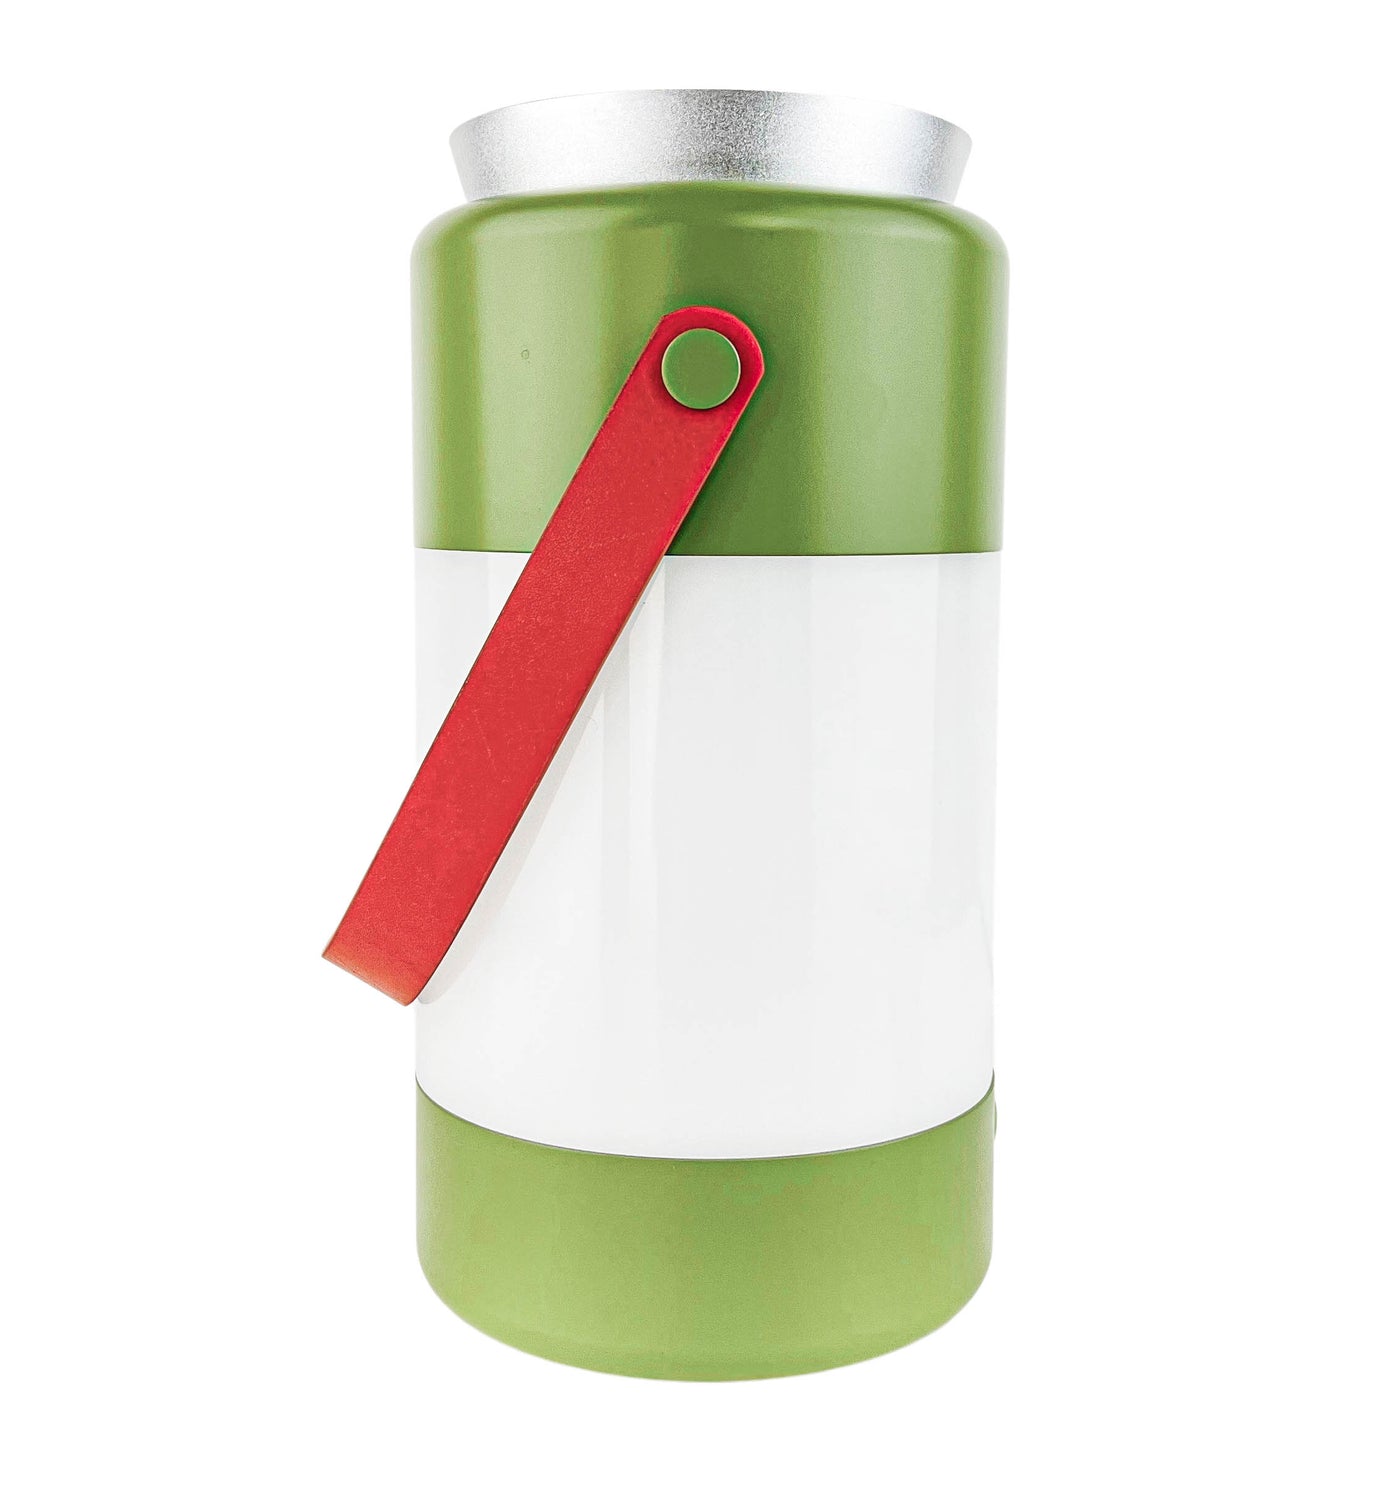 Aluminum Stack Lantern in Olive Green - Discounts on Houseplant at UAL